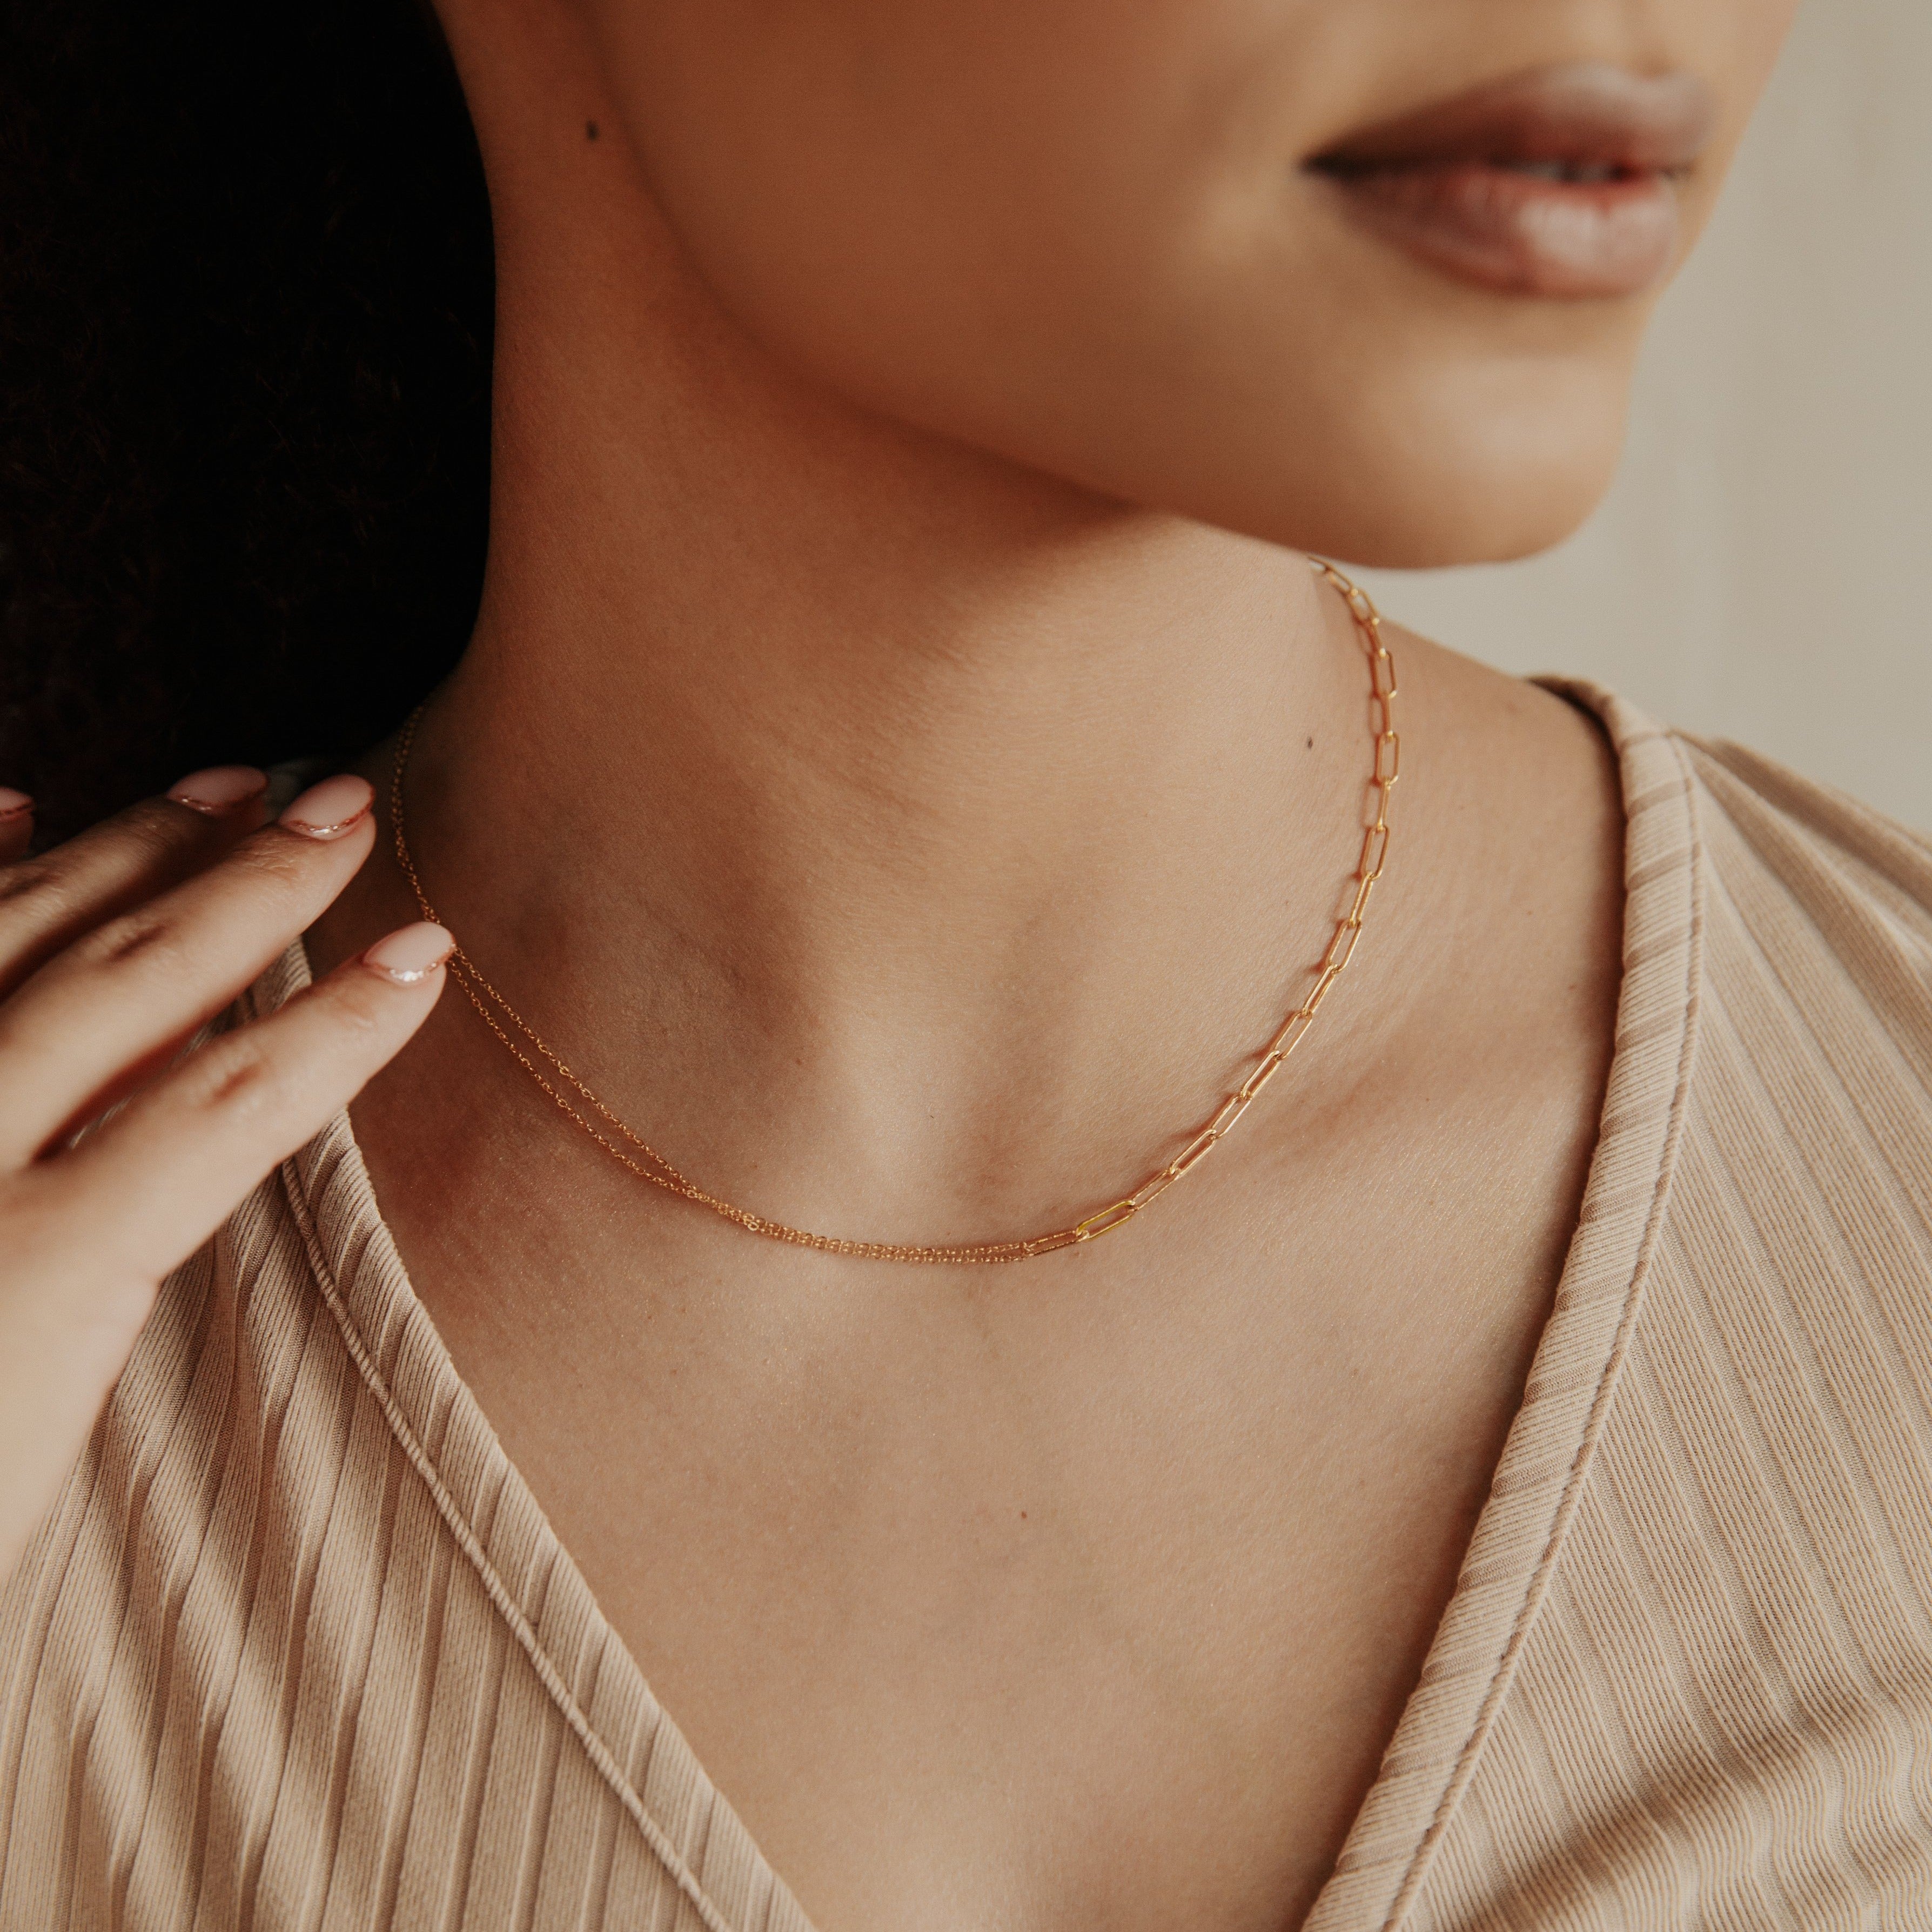 Buy Simple Gold Chain Necklace, Thin Gold Necklace for Layering, Xmas Gift  for Her, Short Minimalist Choker, Women's Jewellery, Dainty Necklace Online  in India - Etsy